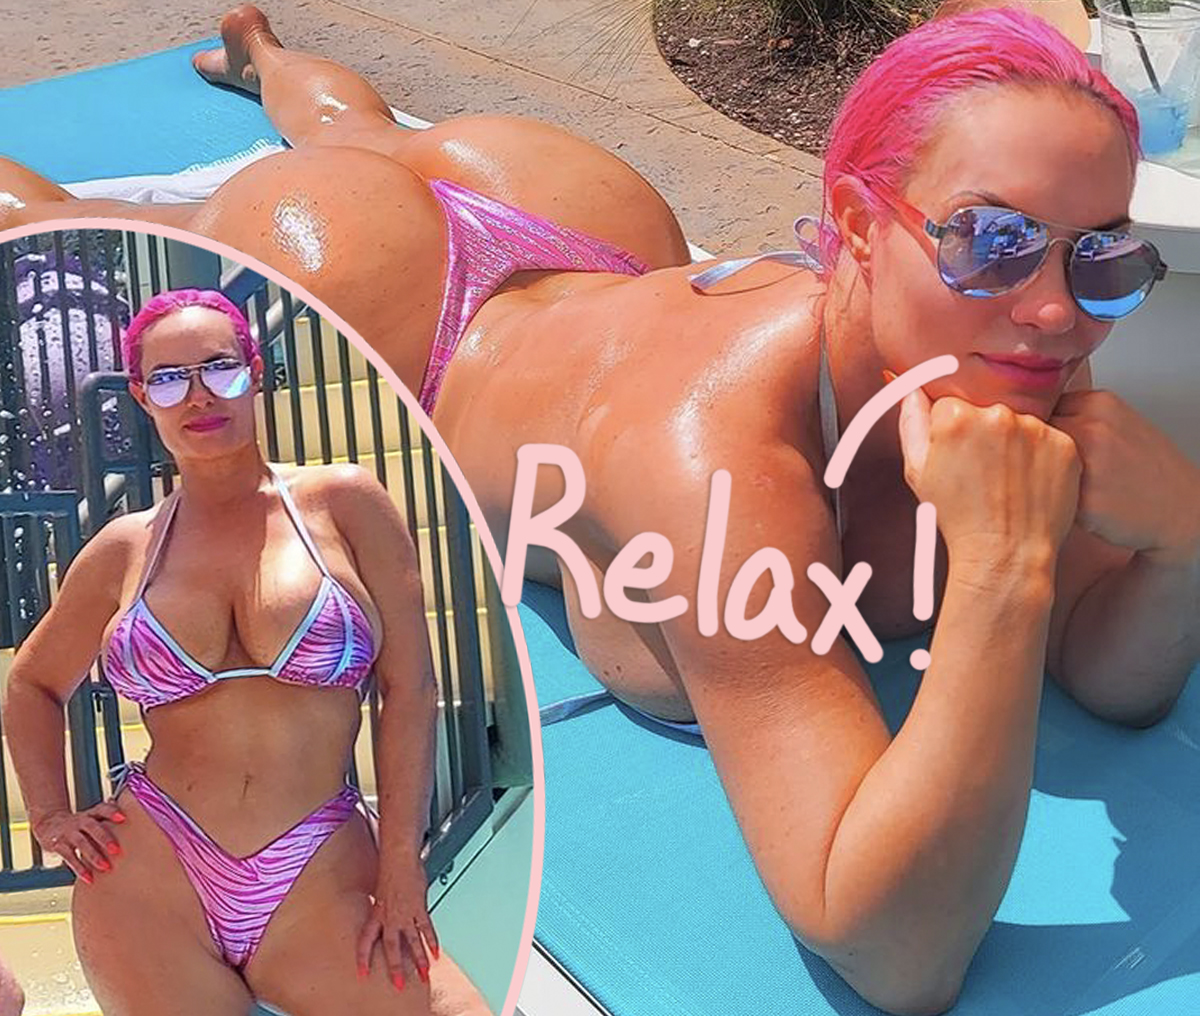 Coco Austin BASHED For Wearing Thong Bikini To A Family Water Park - But Did She Do Anything Wrong?!